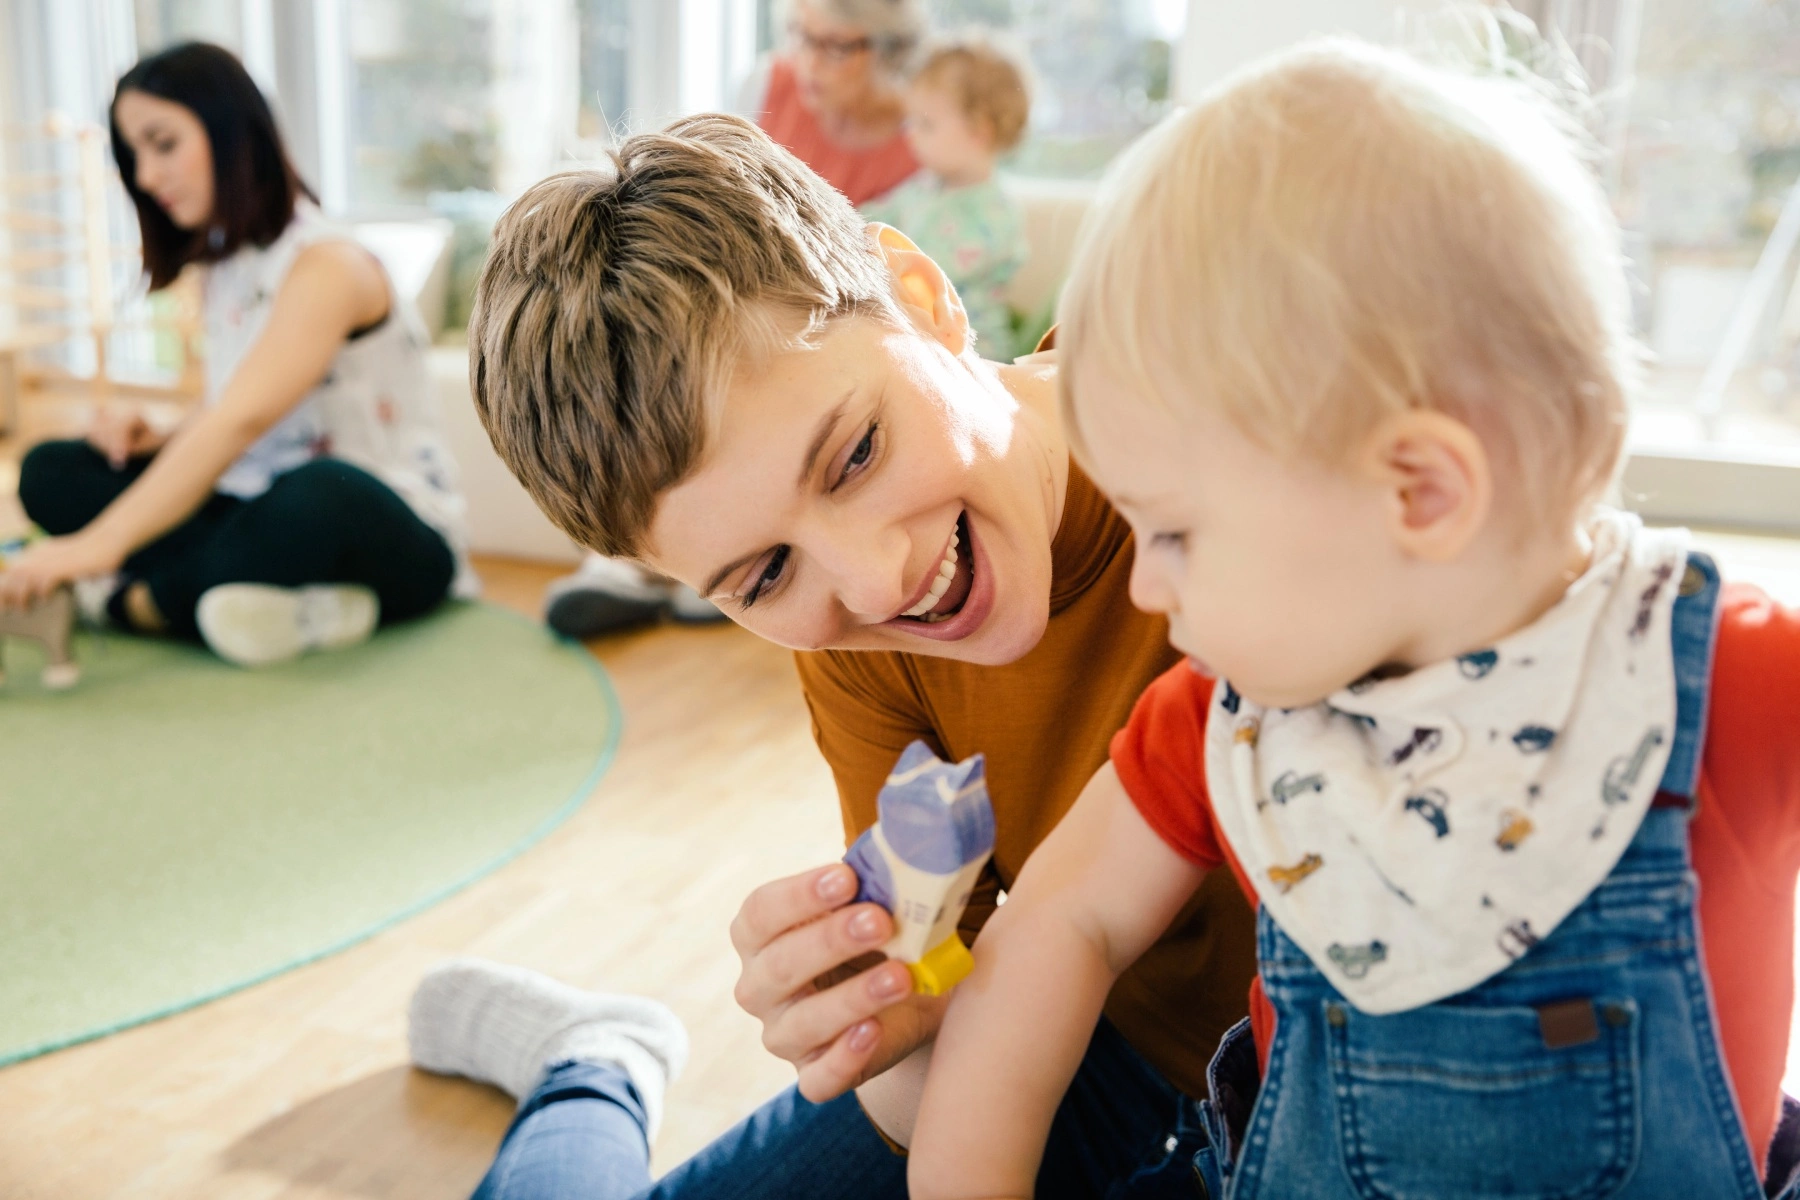 a carer looking after a small baby at a daycare center, smiling and holding a toy